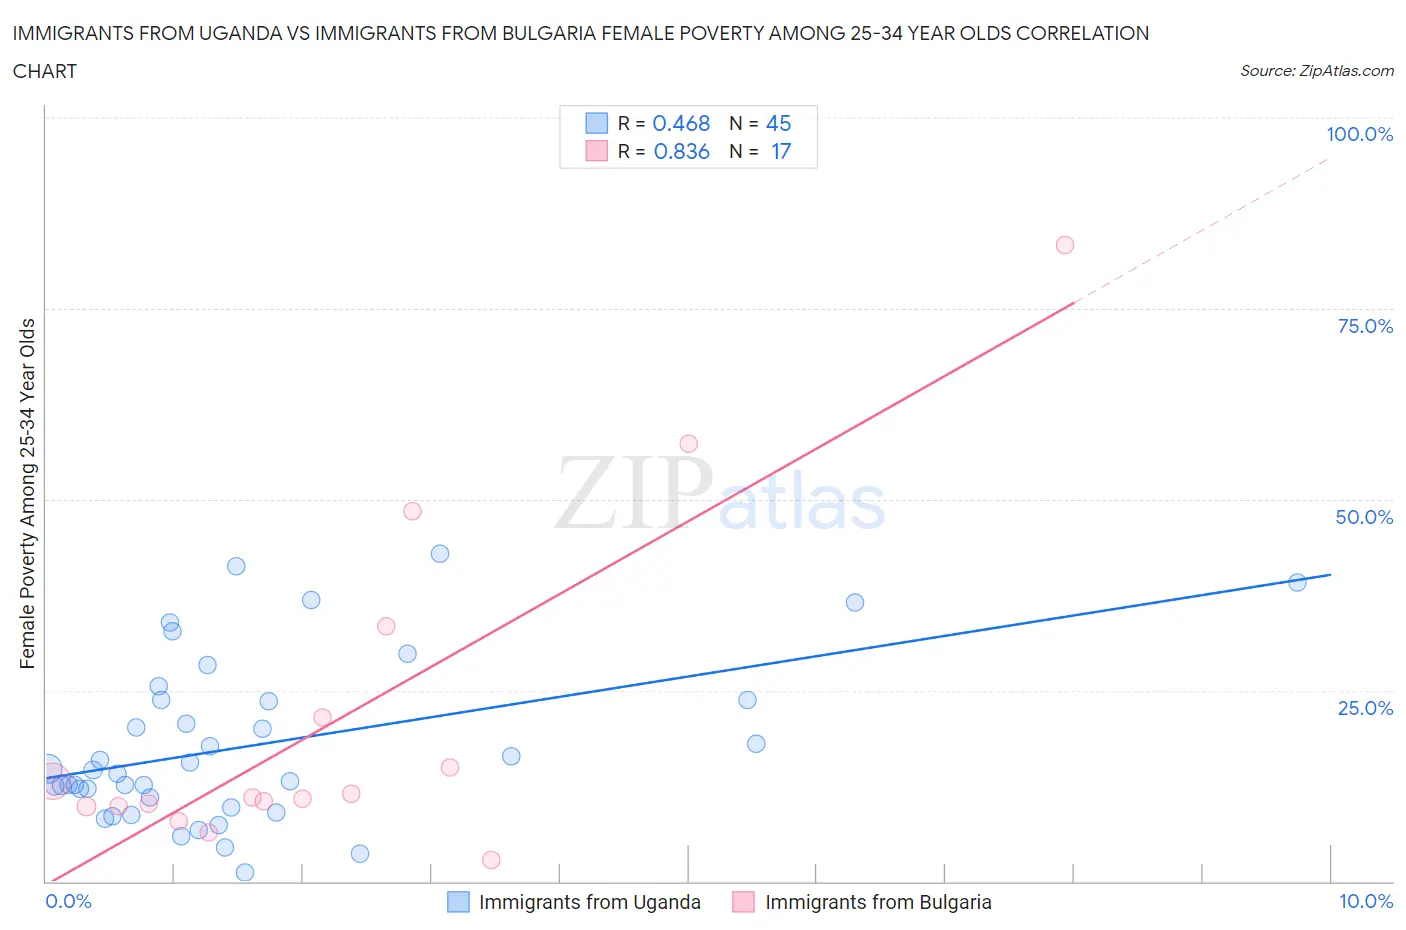 Immigrants from Uganda vs Immigrants from Bulgaria Female Poverty Among 25-34 Year Olds